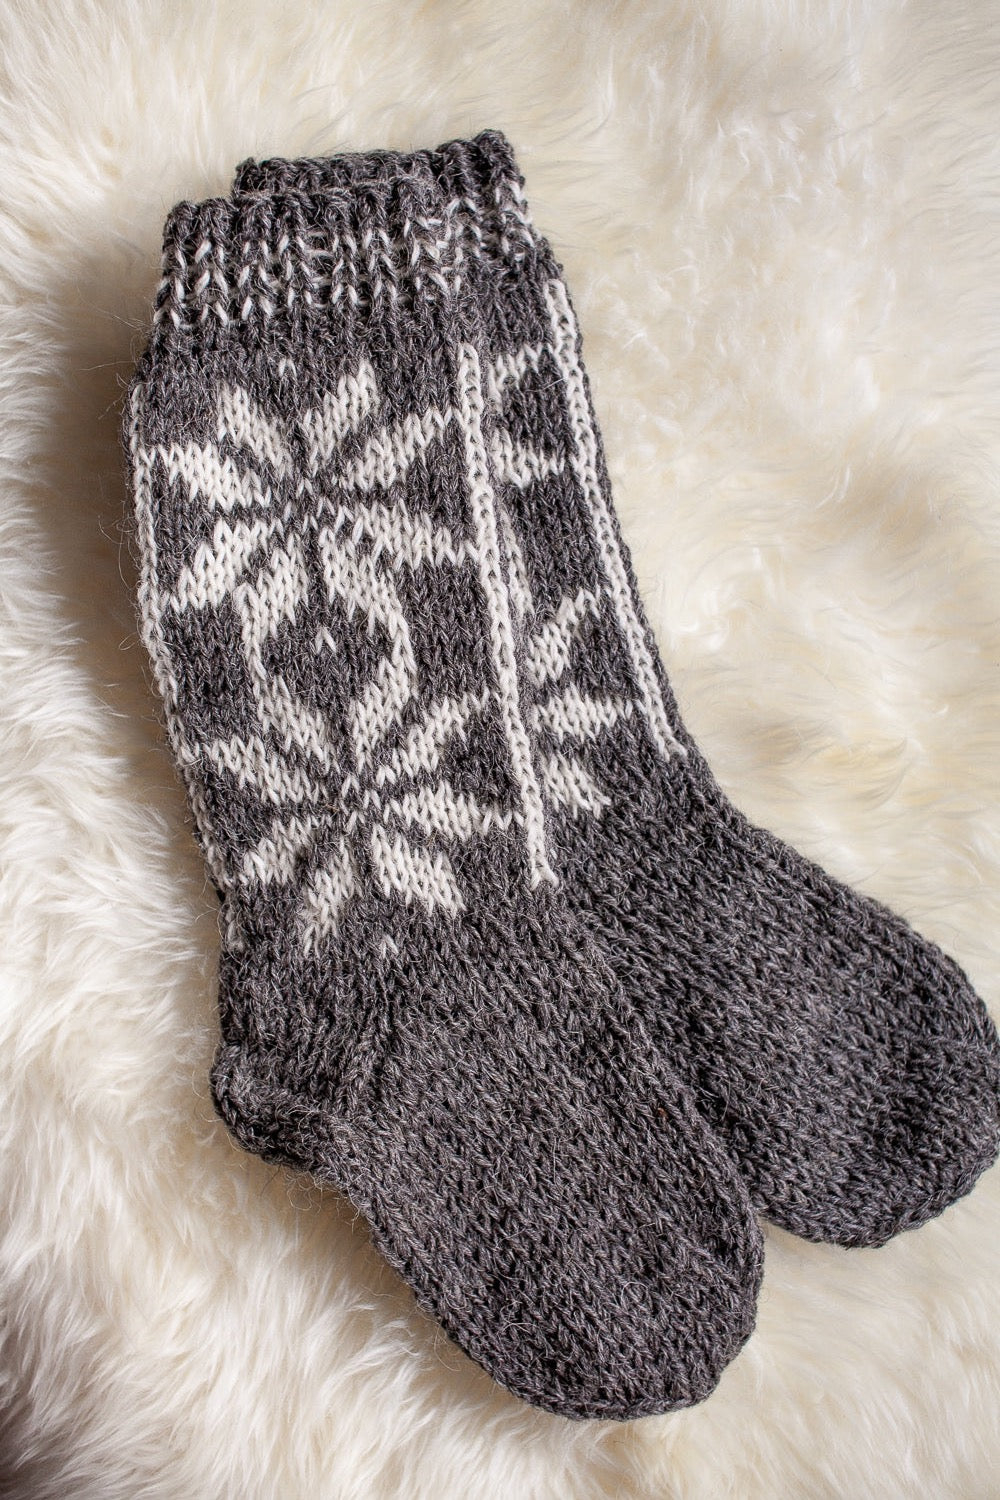 Knitted socks with star pattern, very warm and long